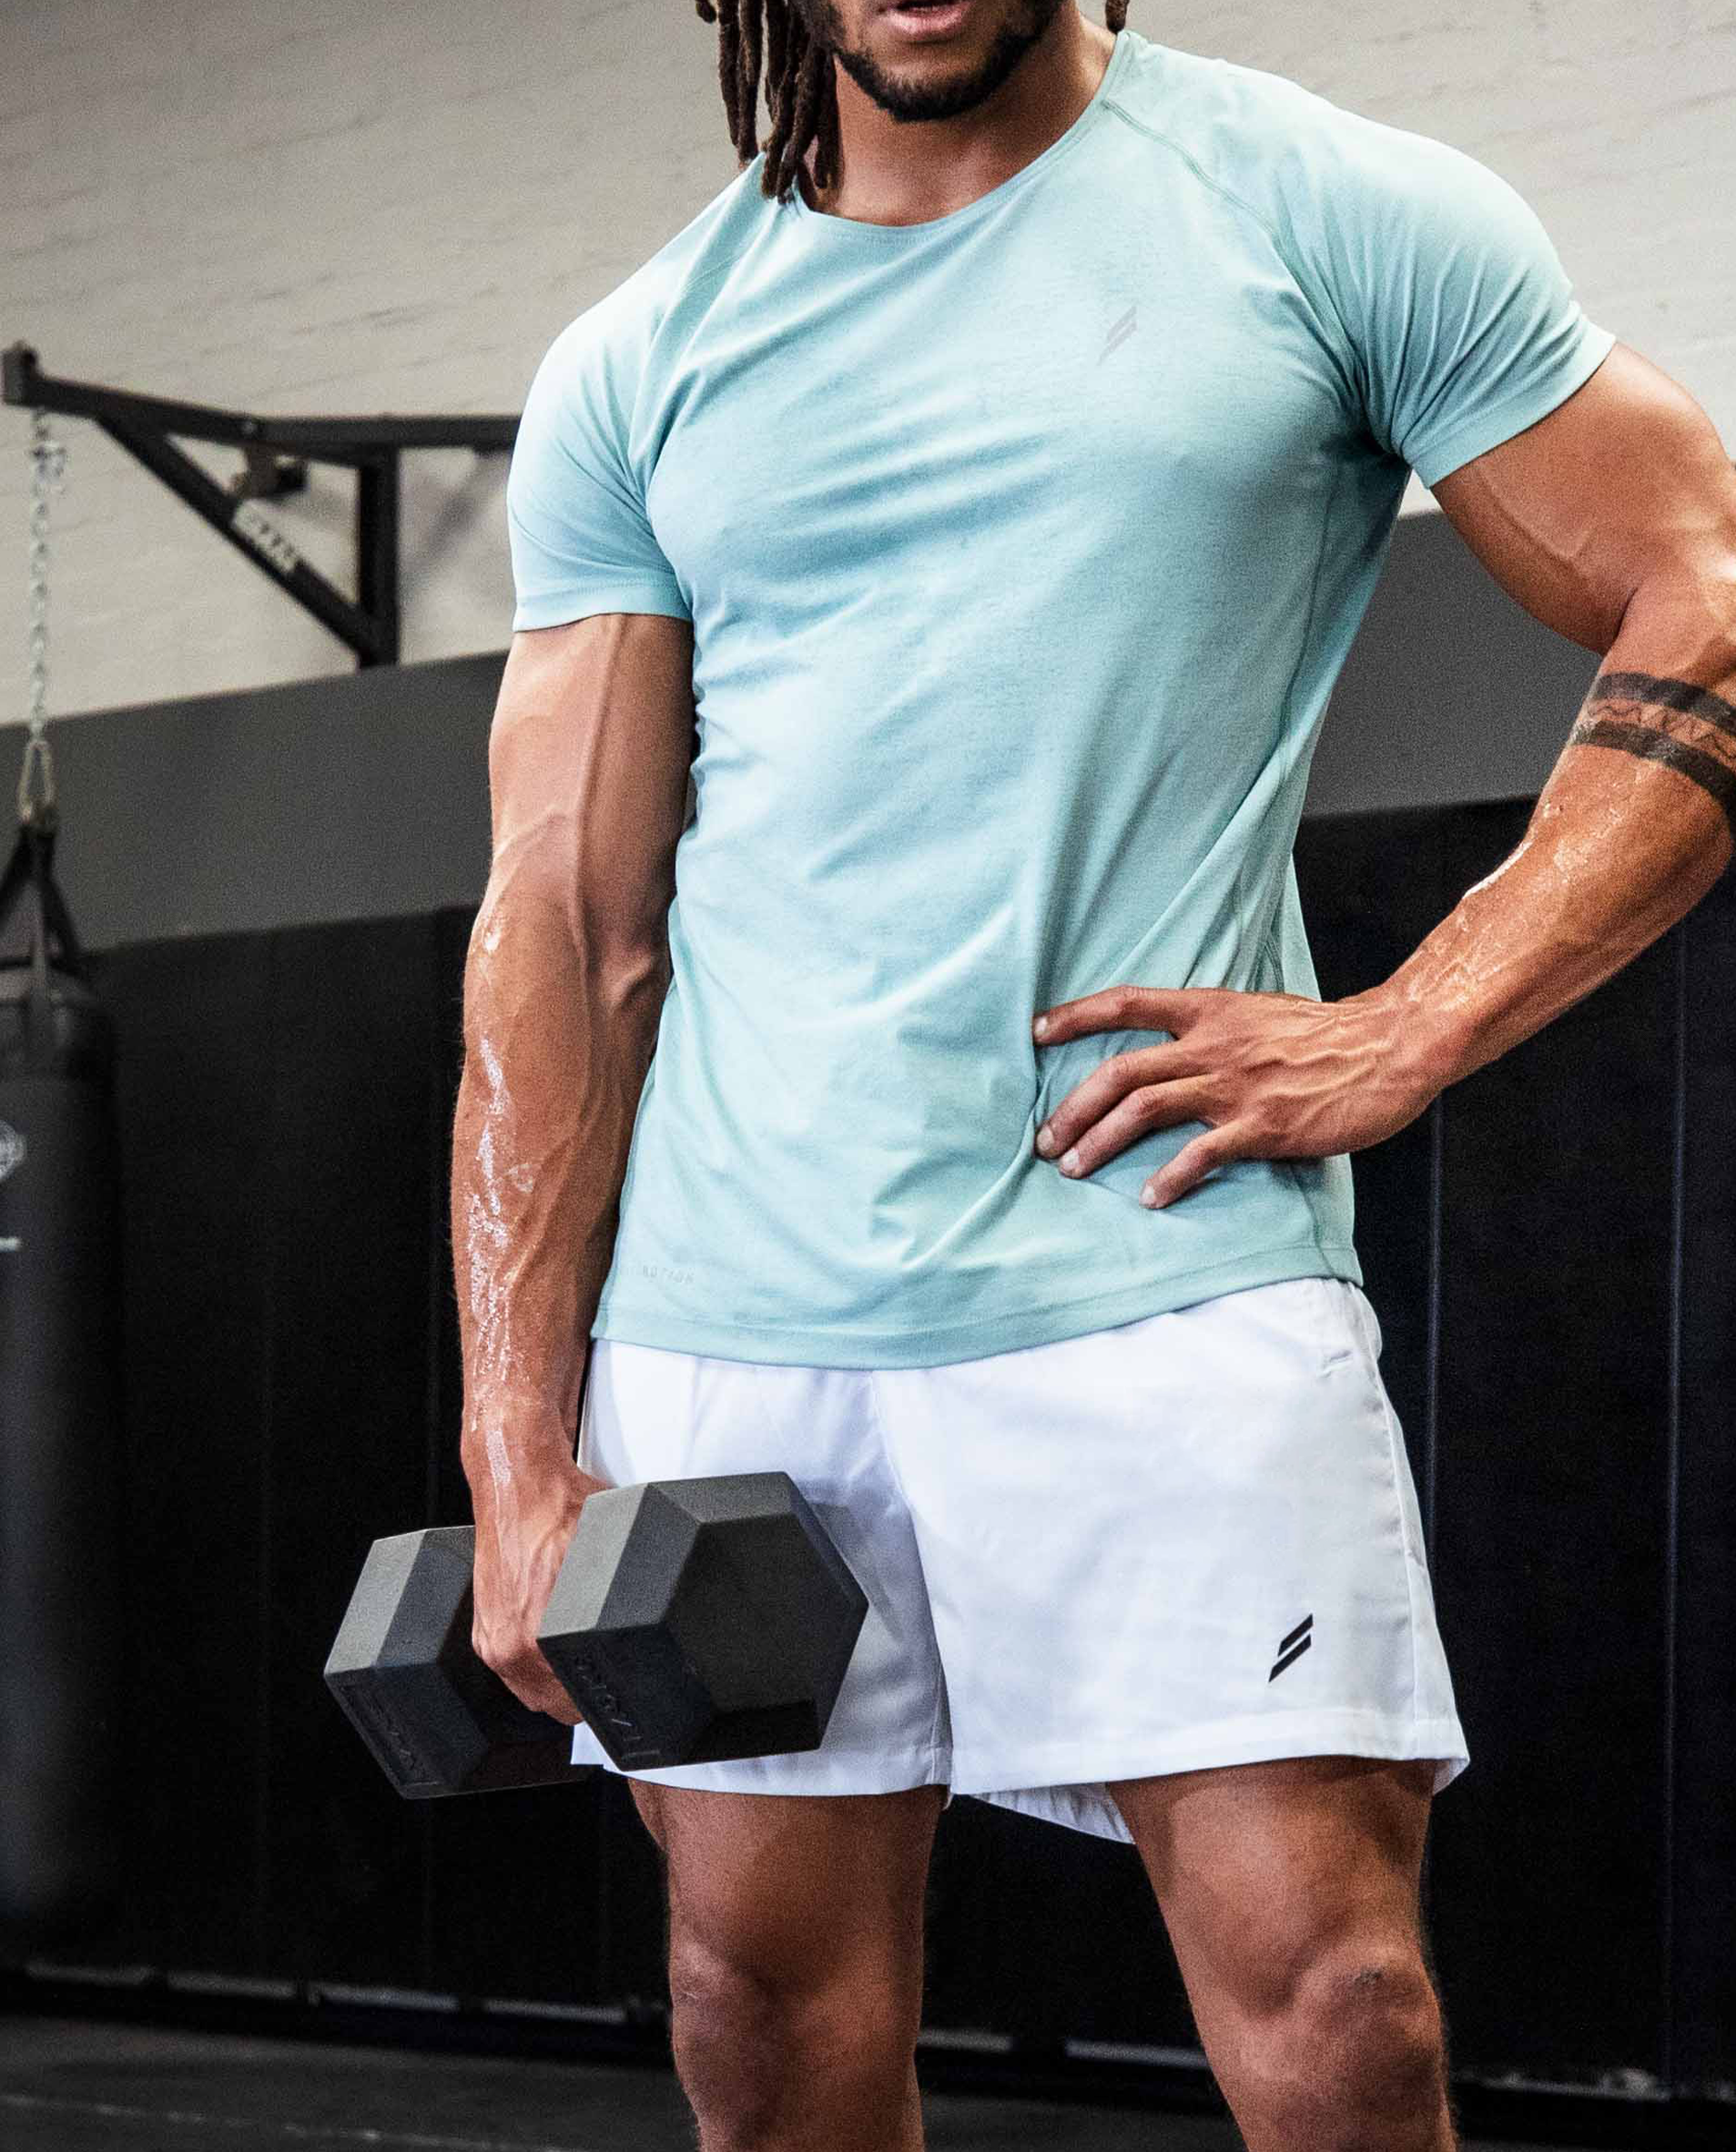 Best Gym Clothes. How Should Gym Clothes Be? - Arnold Gym Gear